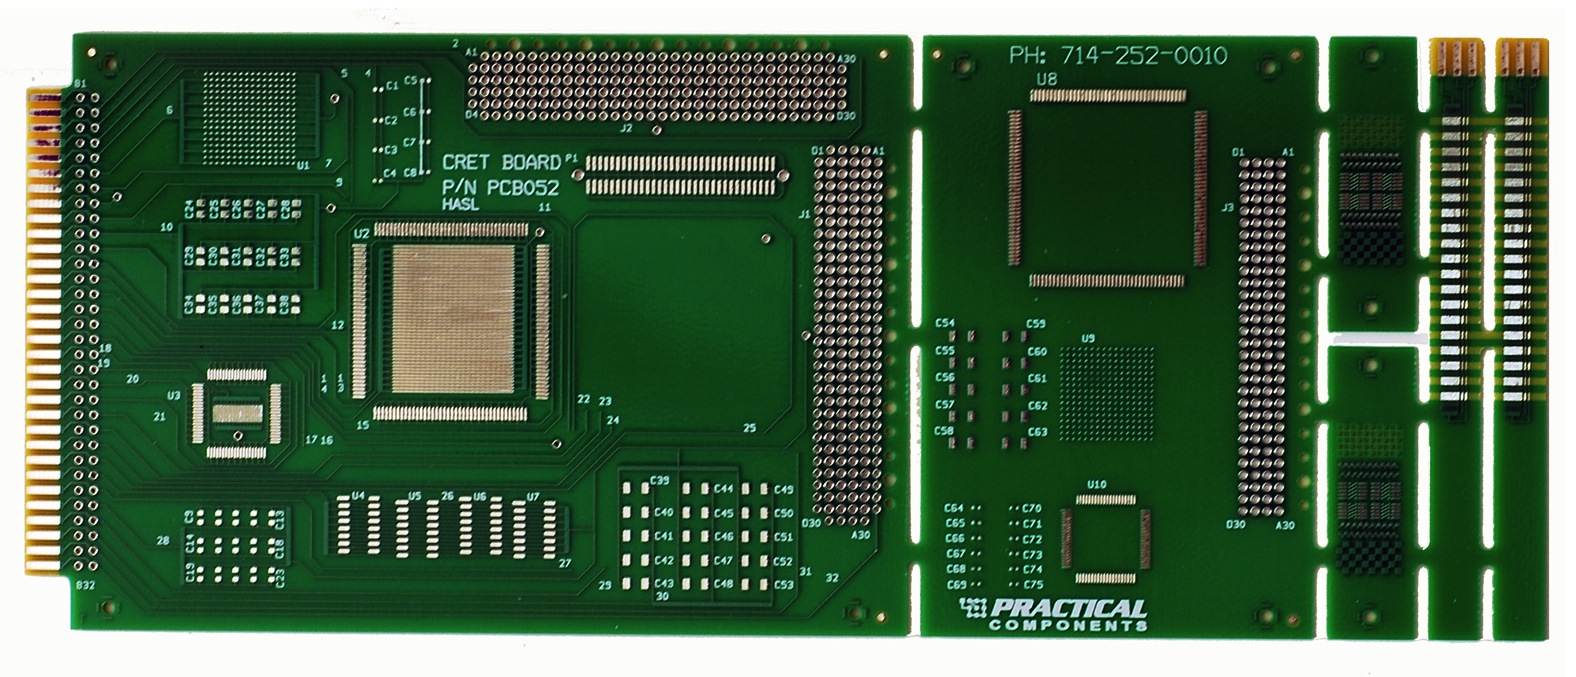 Test Boards for Cleanliness and Conformal Coating